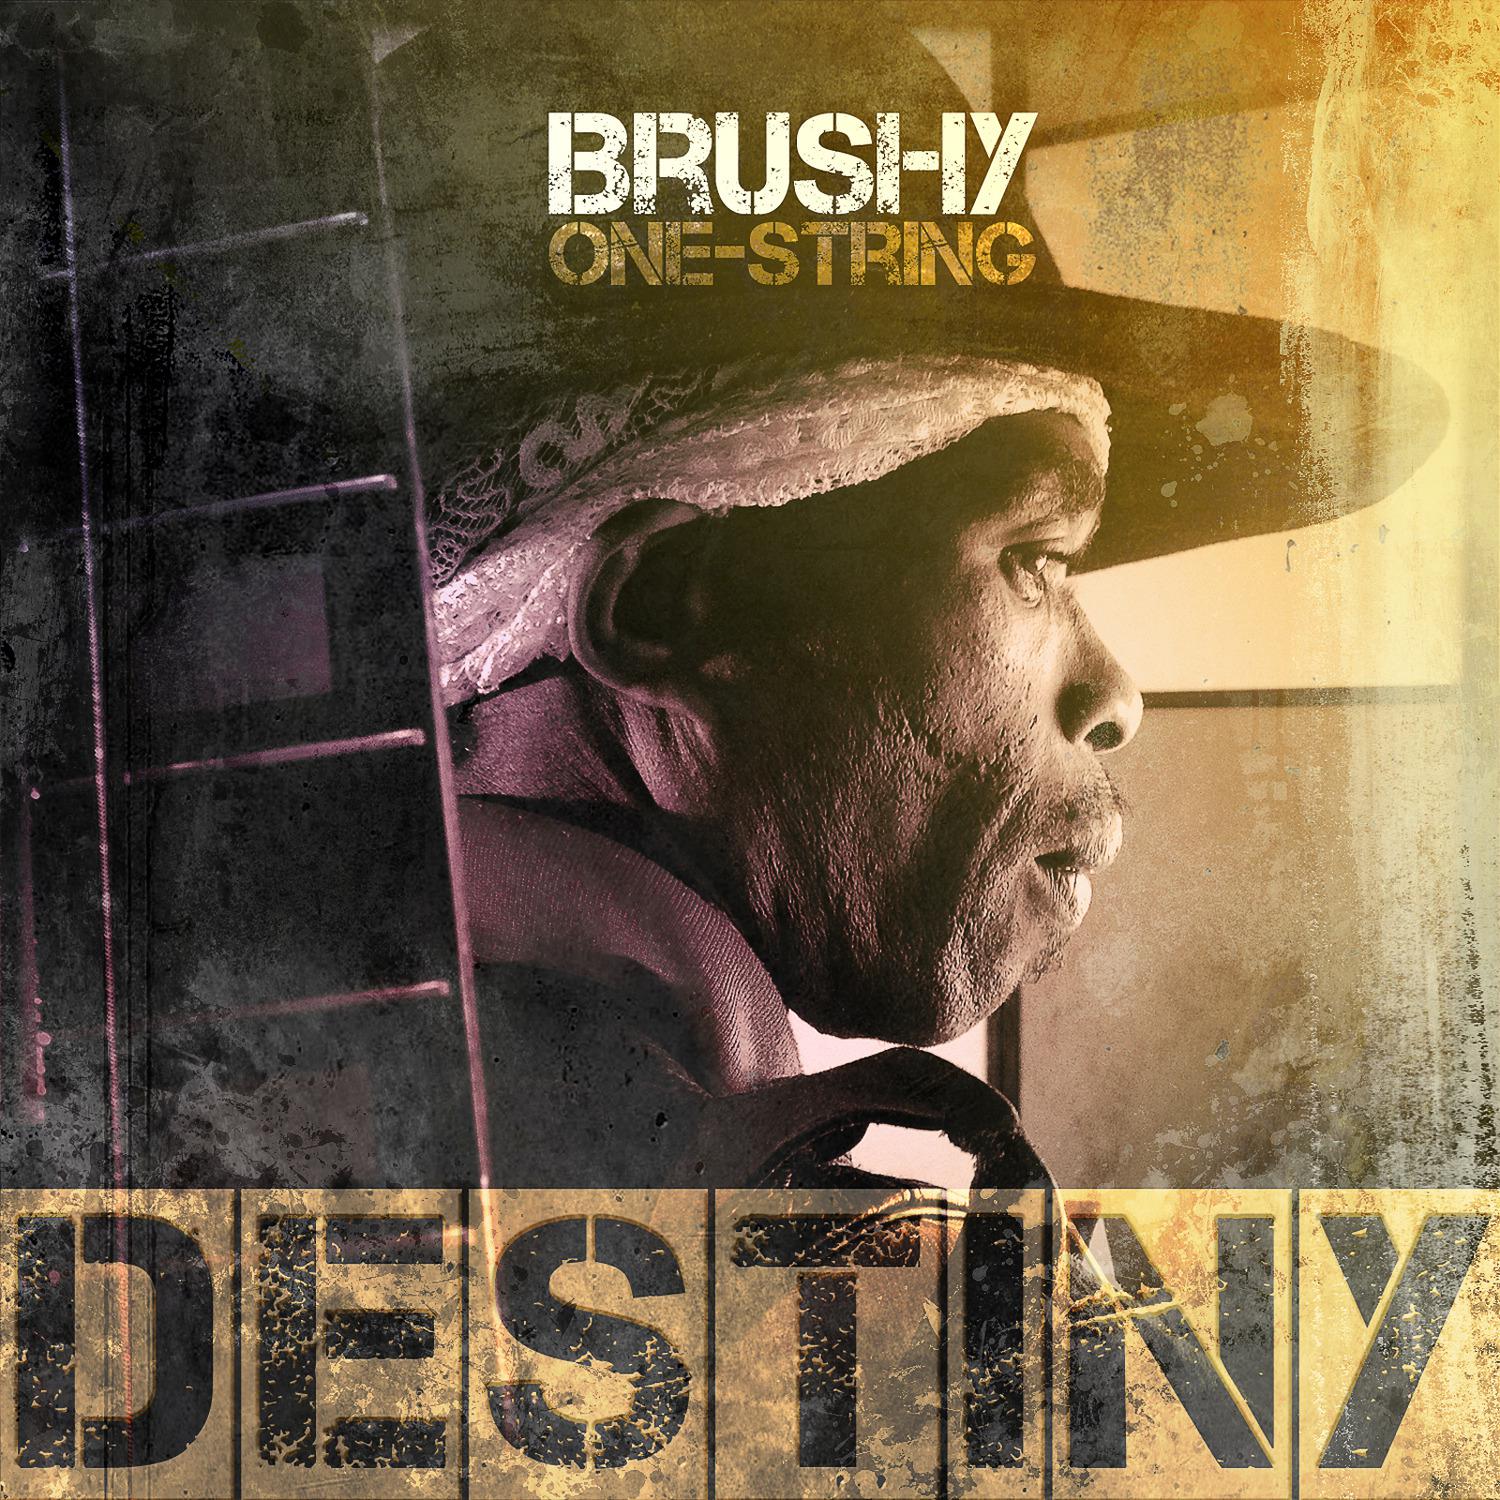 Brushy one string - They Are Going Down